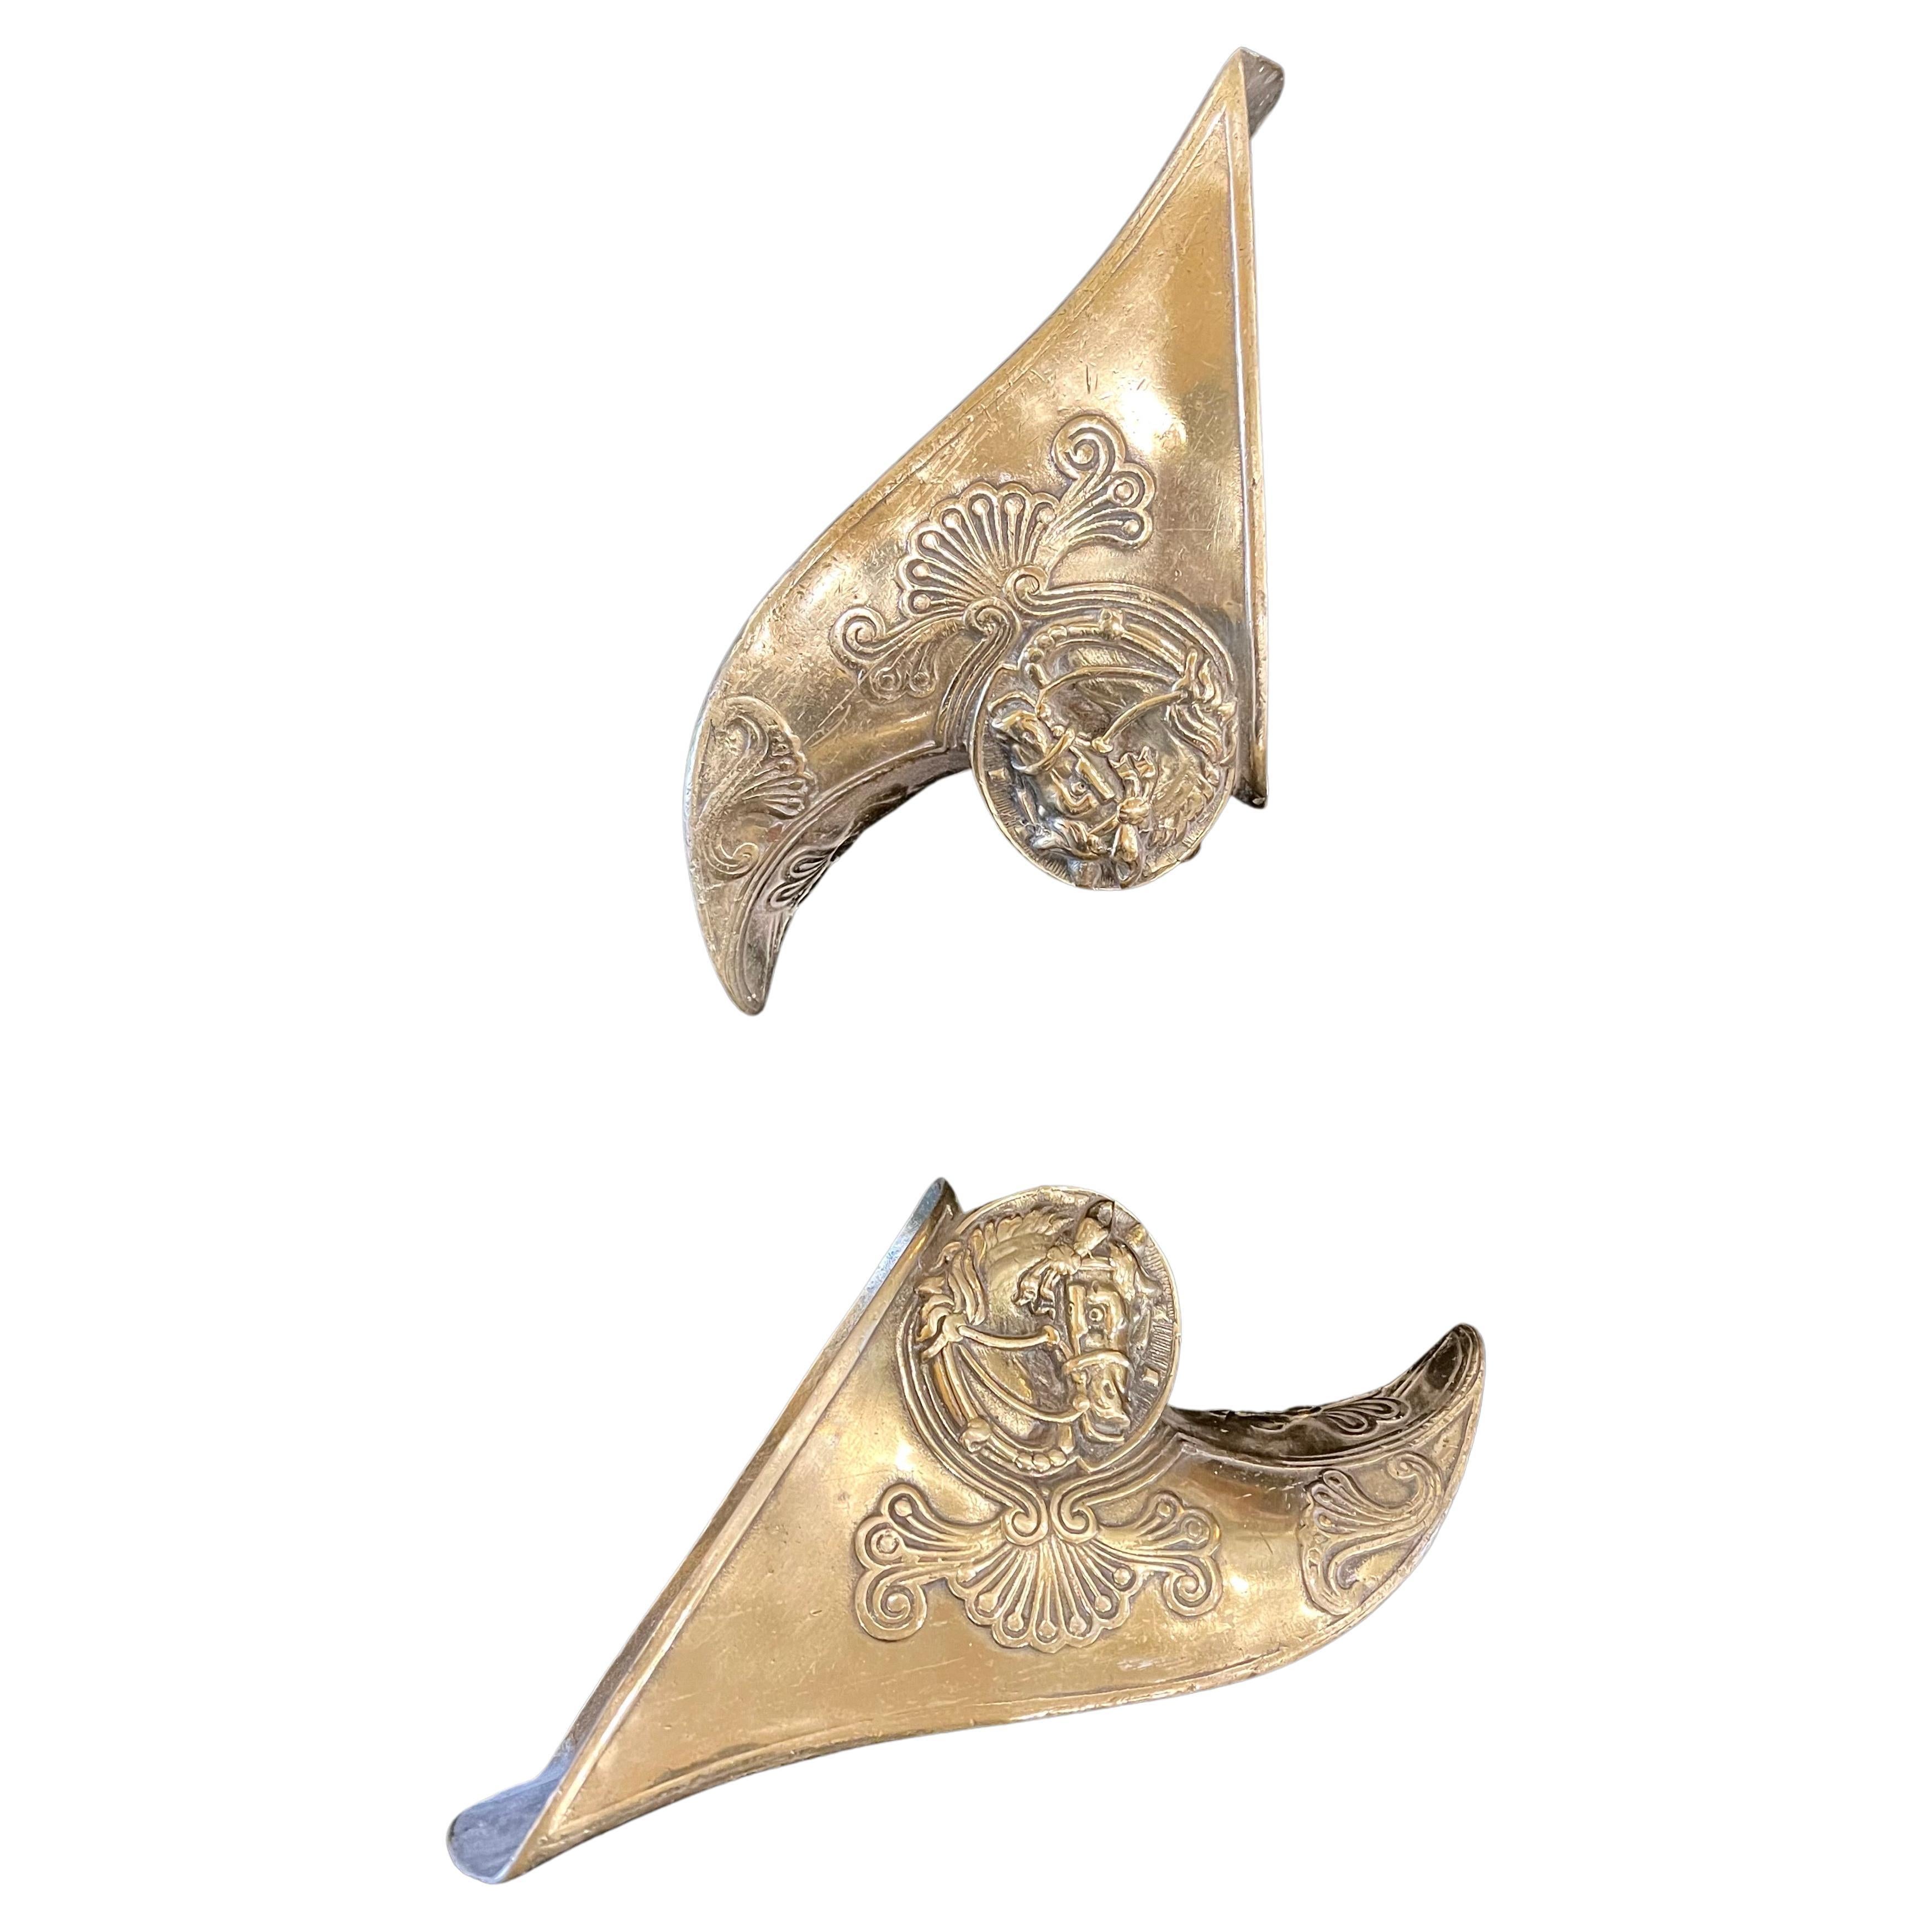 Pair of solid patinated brass stirrups decorative wall hanging pieces.